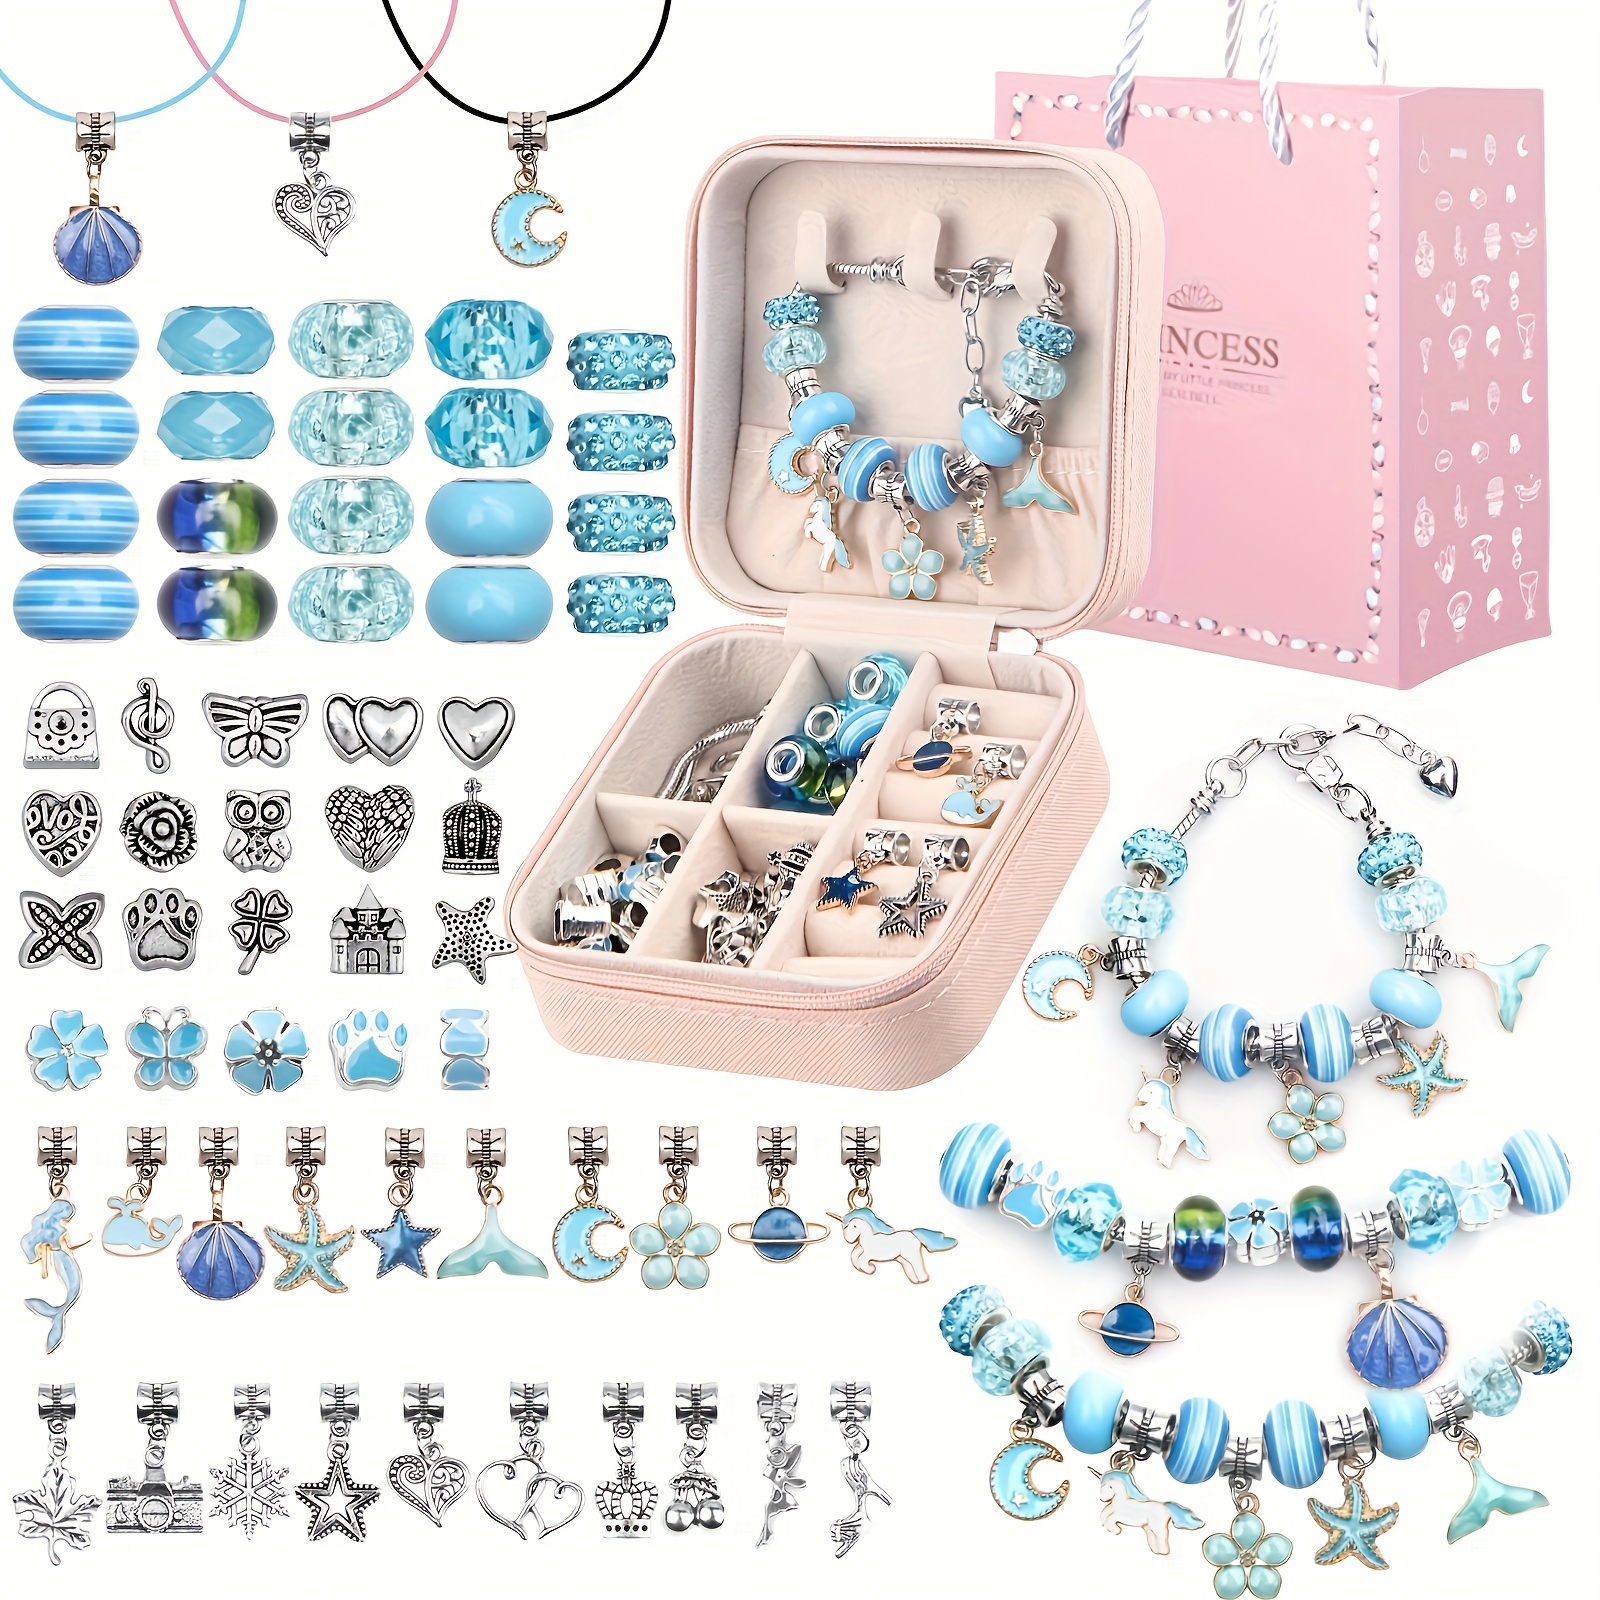 66Pcs Charm Bracelet Making Kit with Jewelry Box, Teen Girl Gifts Jewelry  Making Kit, Girl Toys Art Supplies Crafts for Girls Age 8-12 